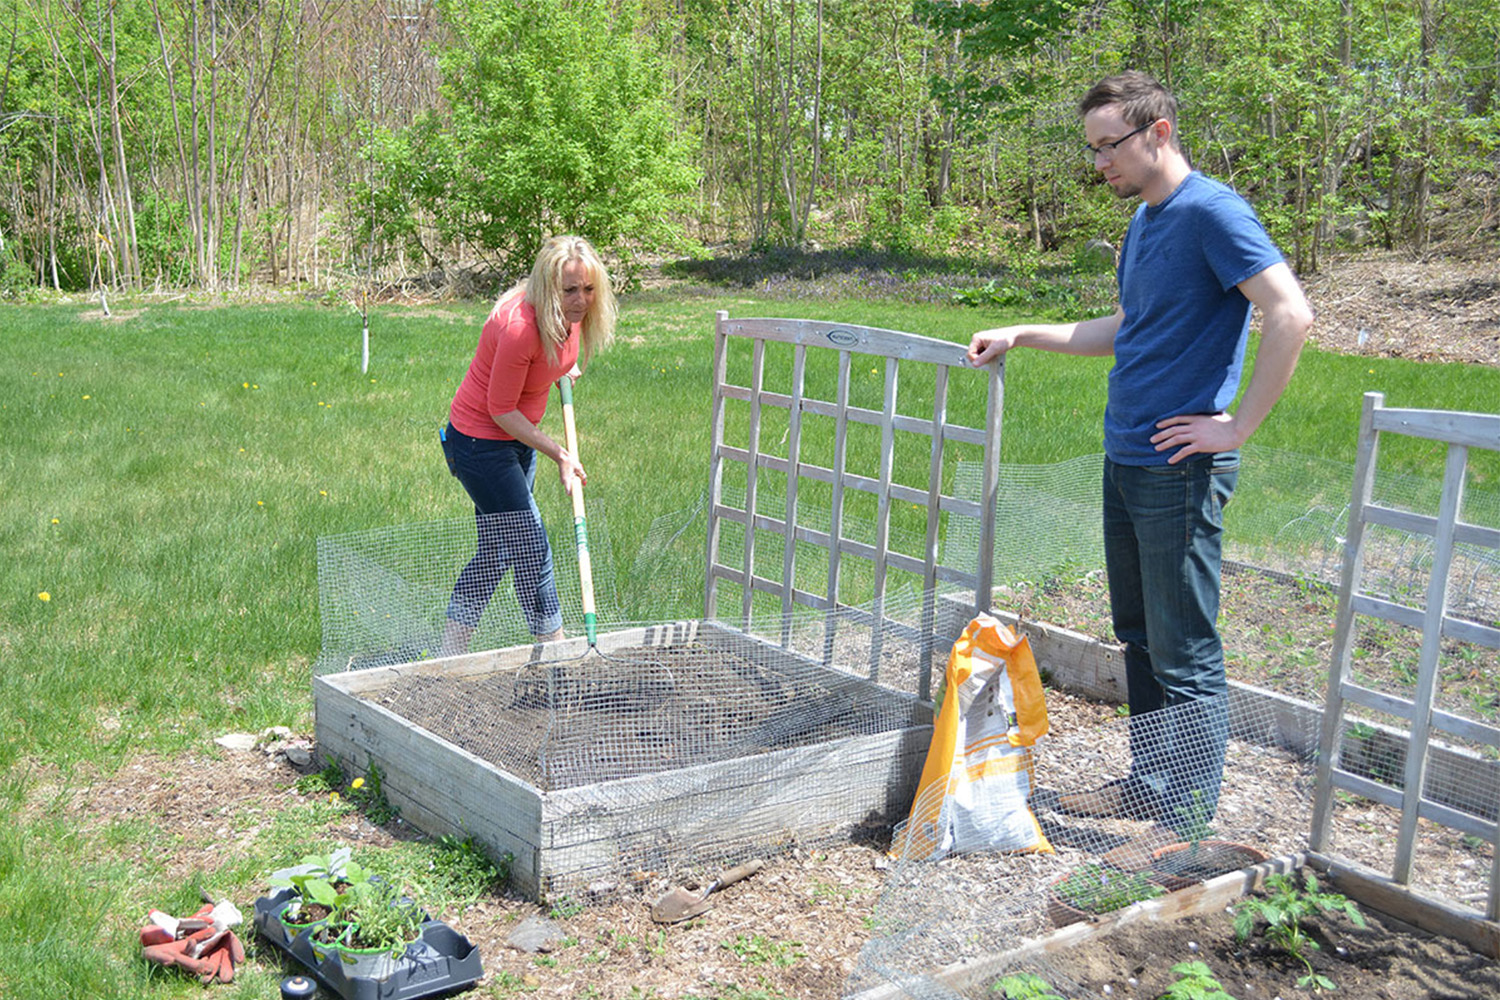 Joann and Caleb get the garden bed ready for planting.